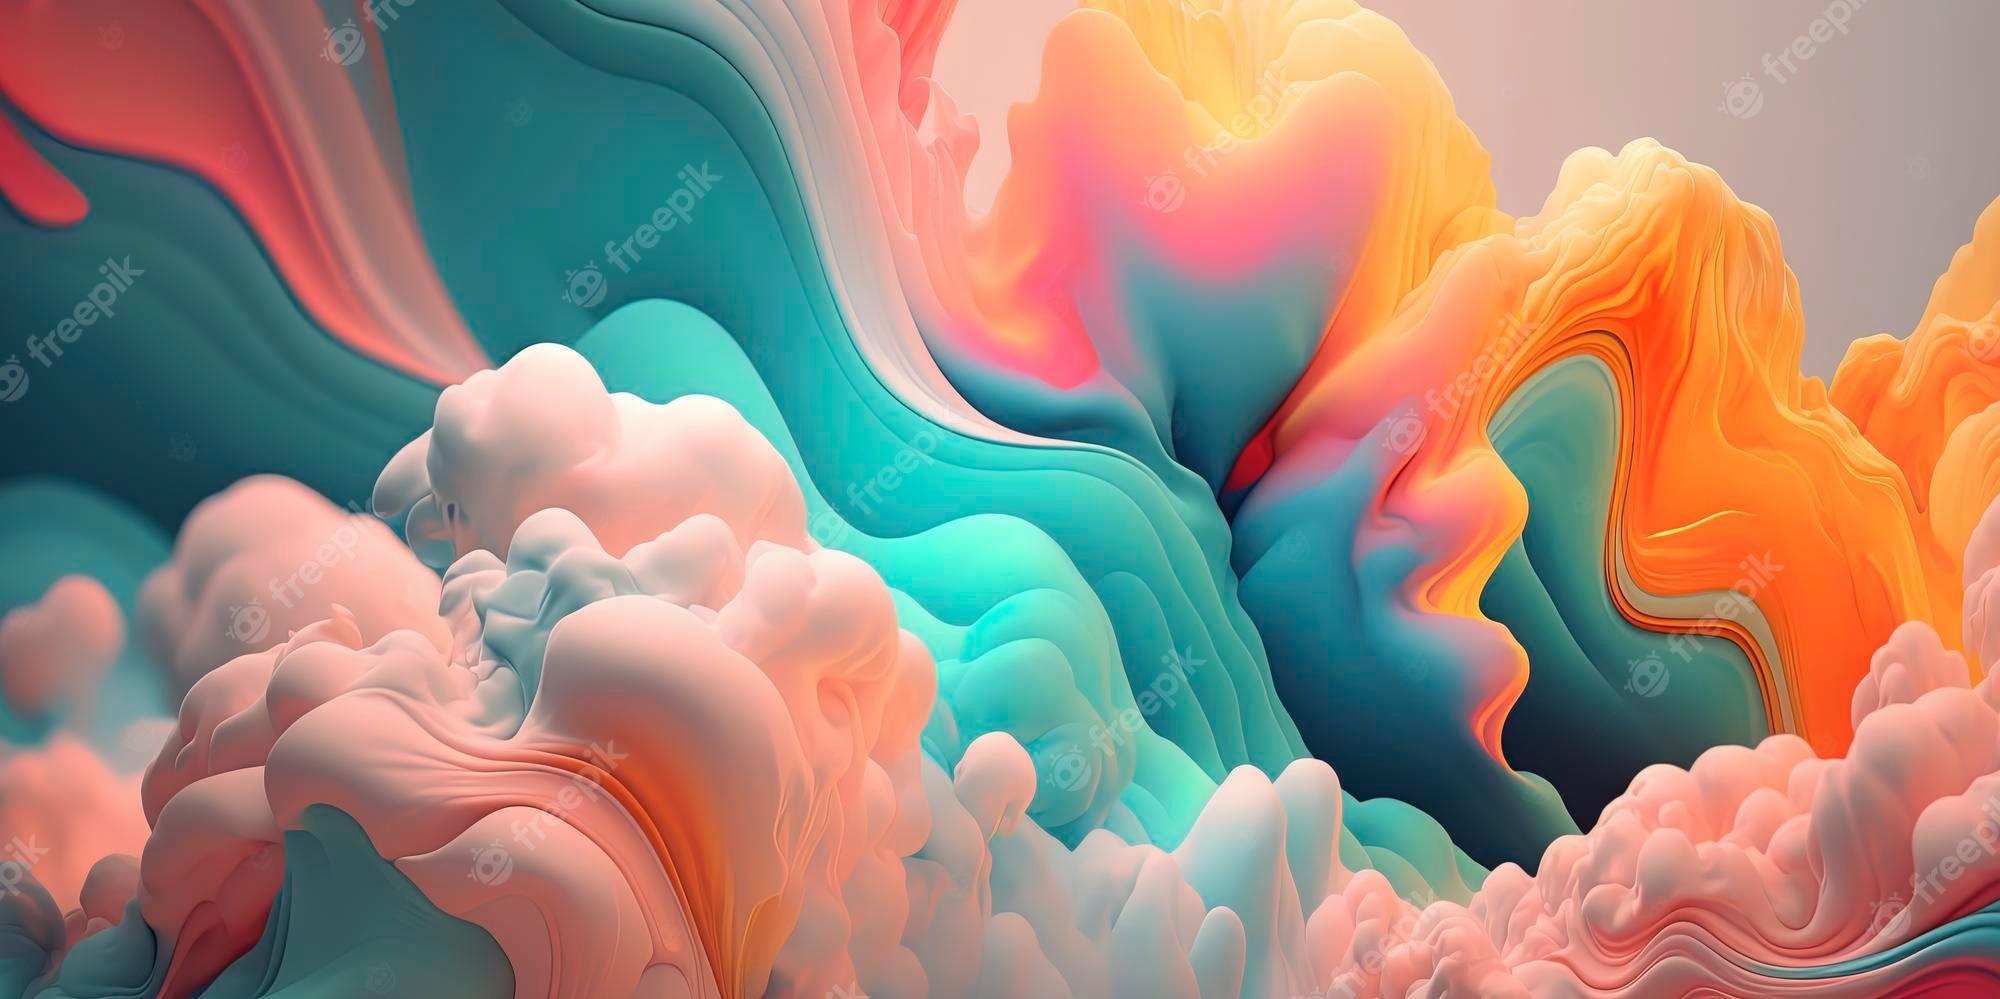 Premium Photo Amazing Abstract Wallpaper With Soft Pastel Colors